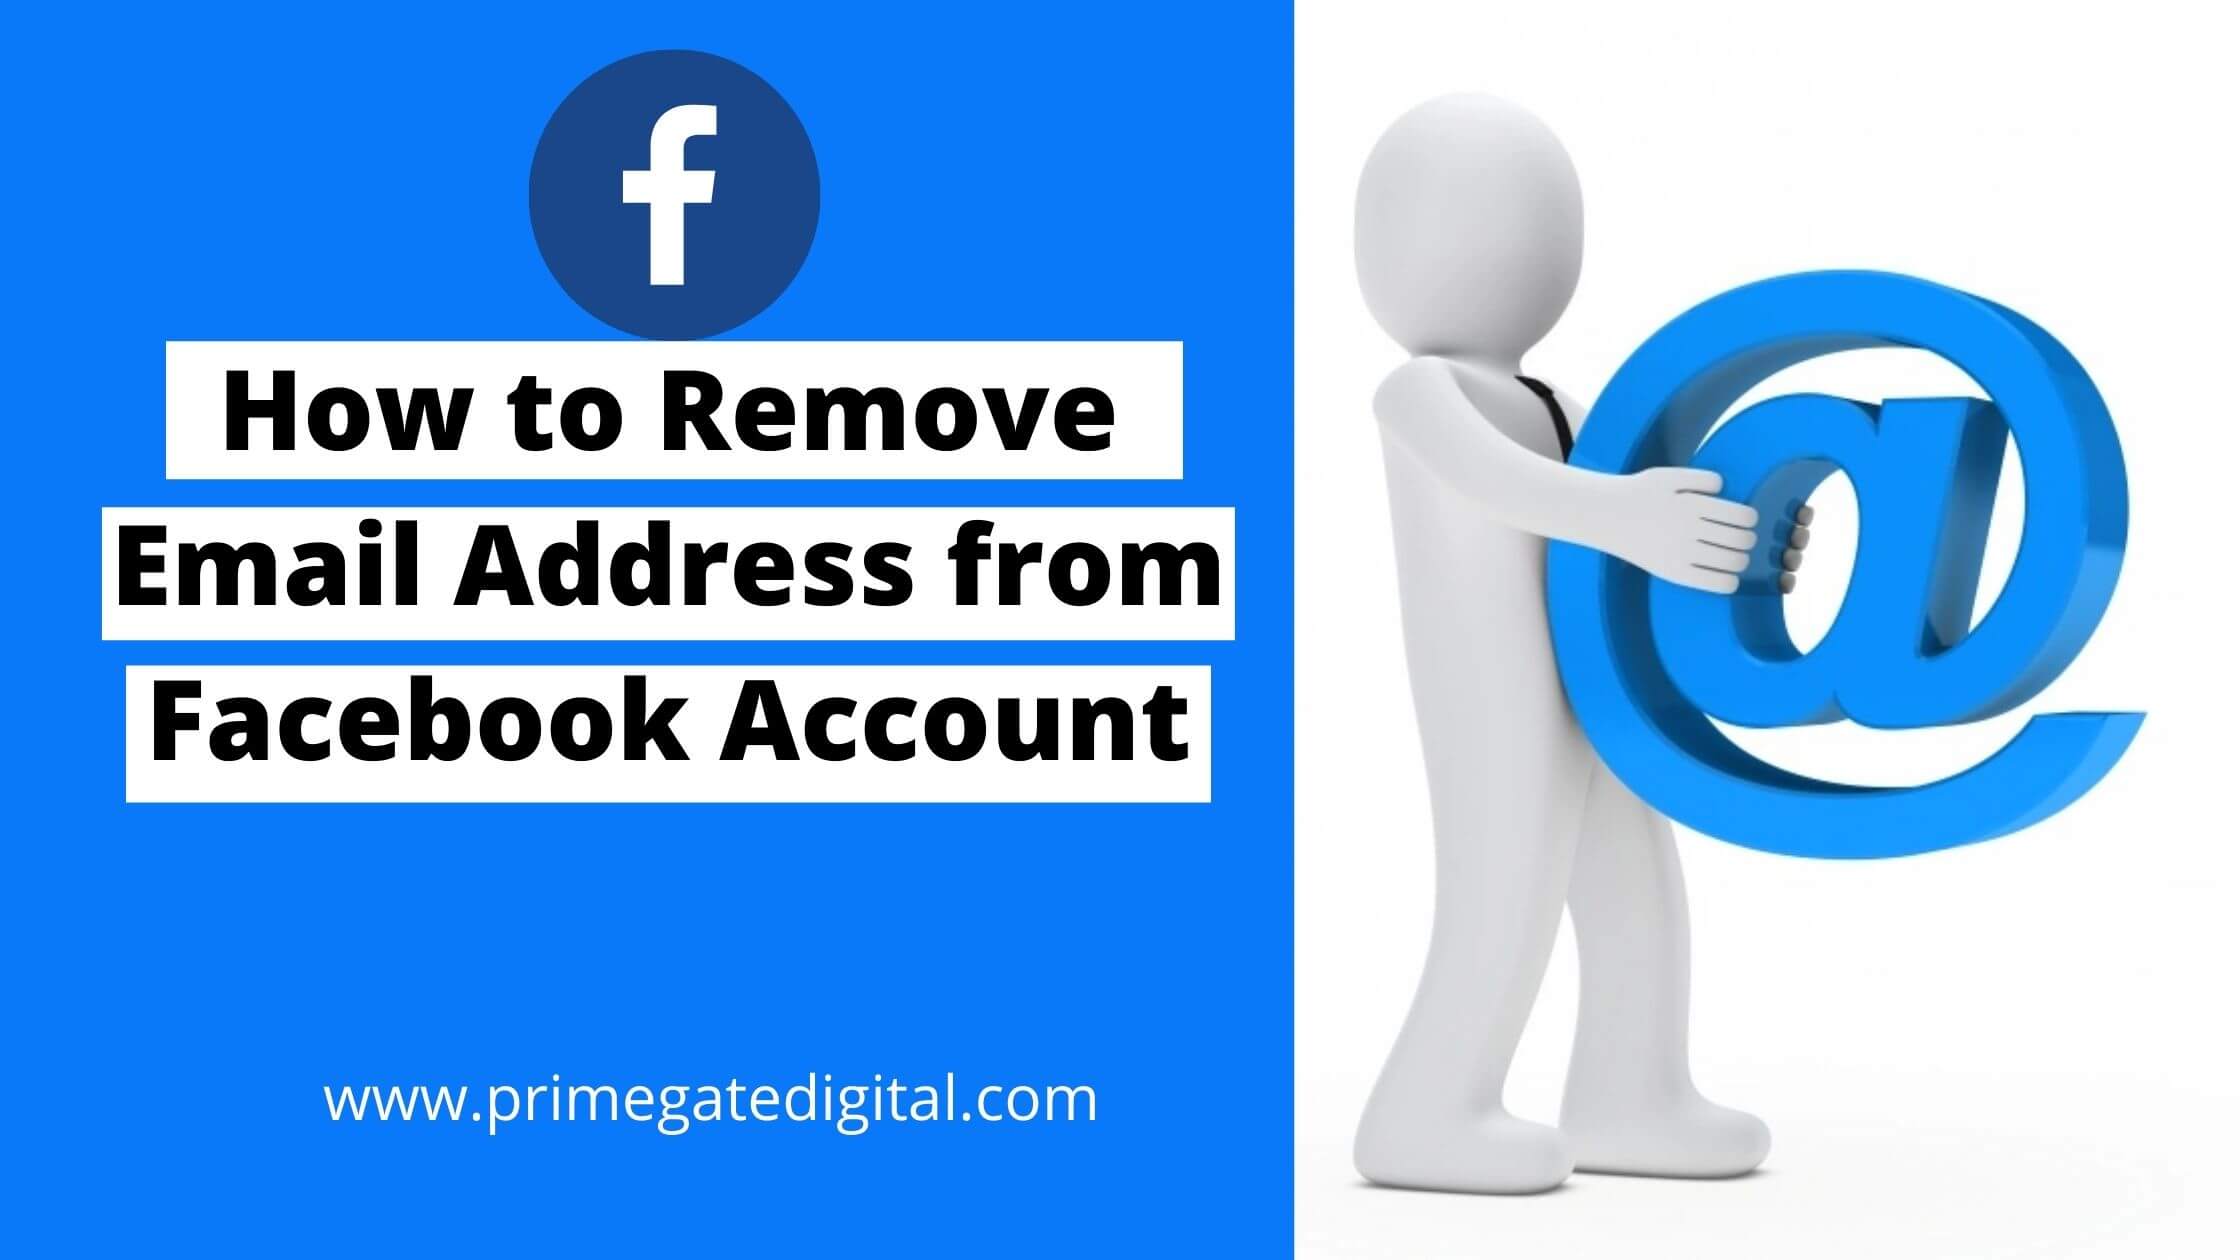 How to Remove Email Address from Facebook Account